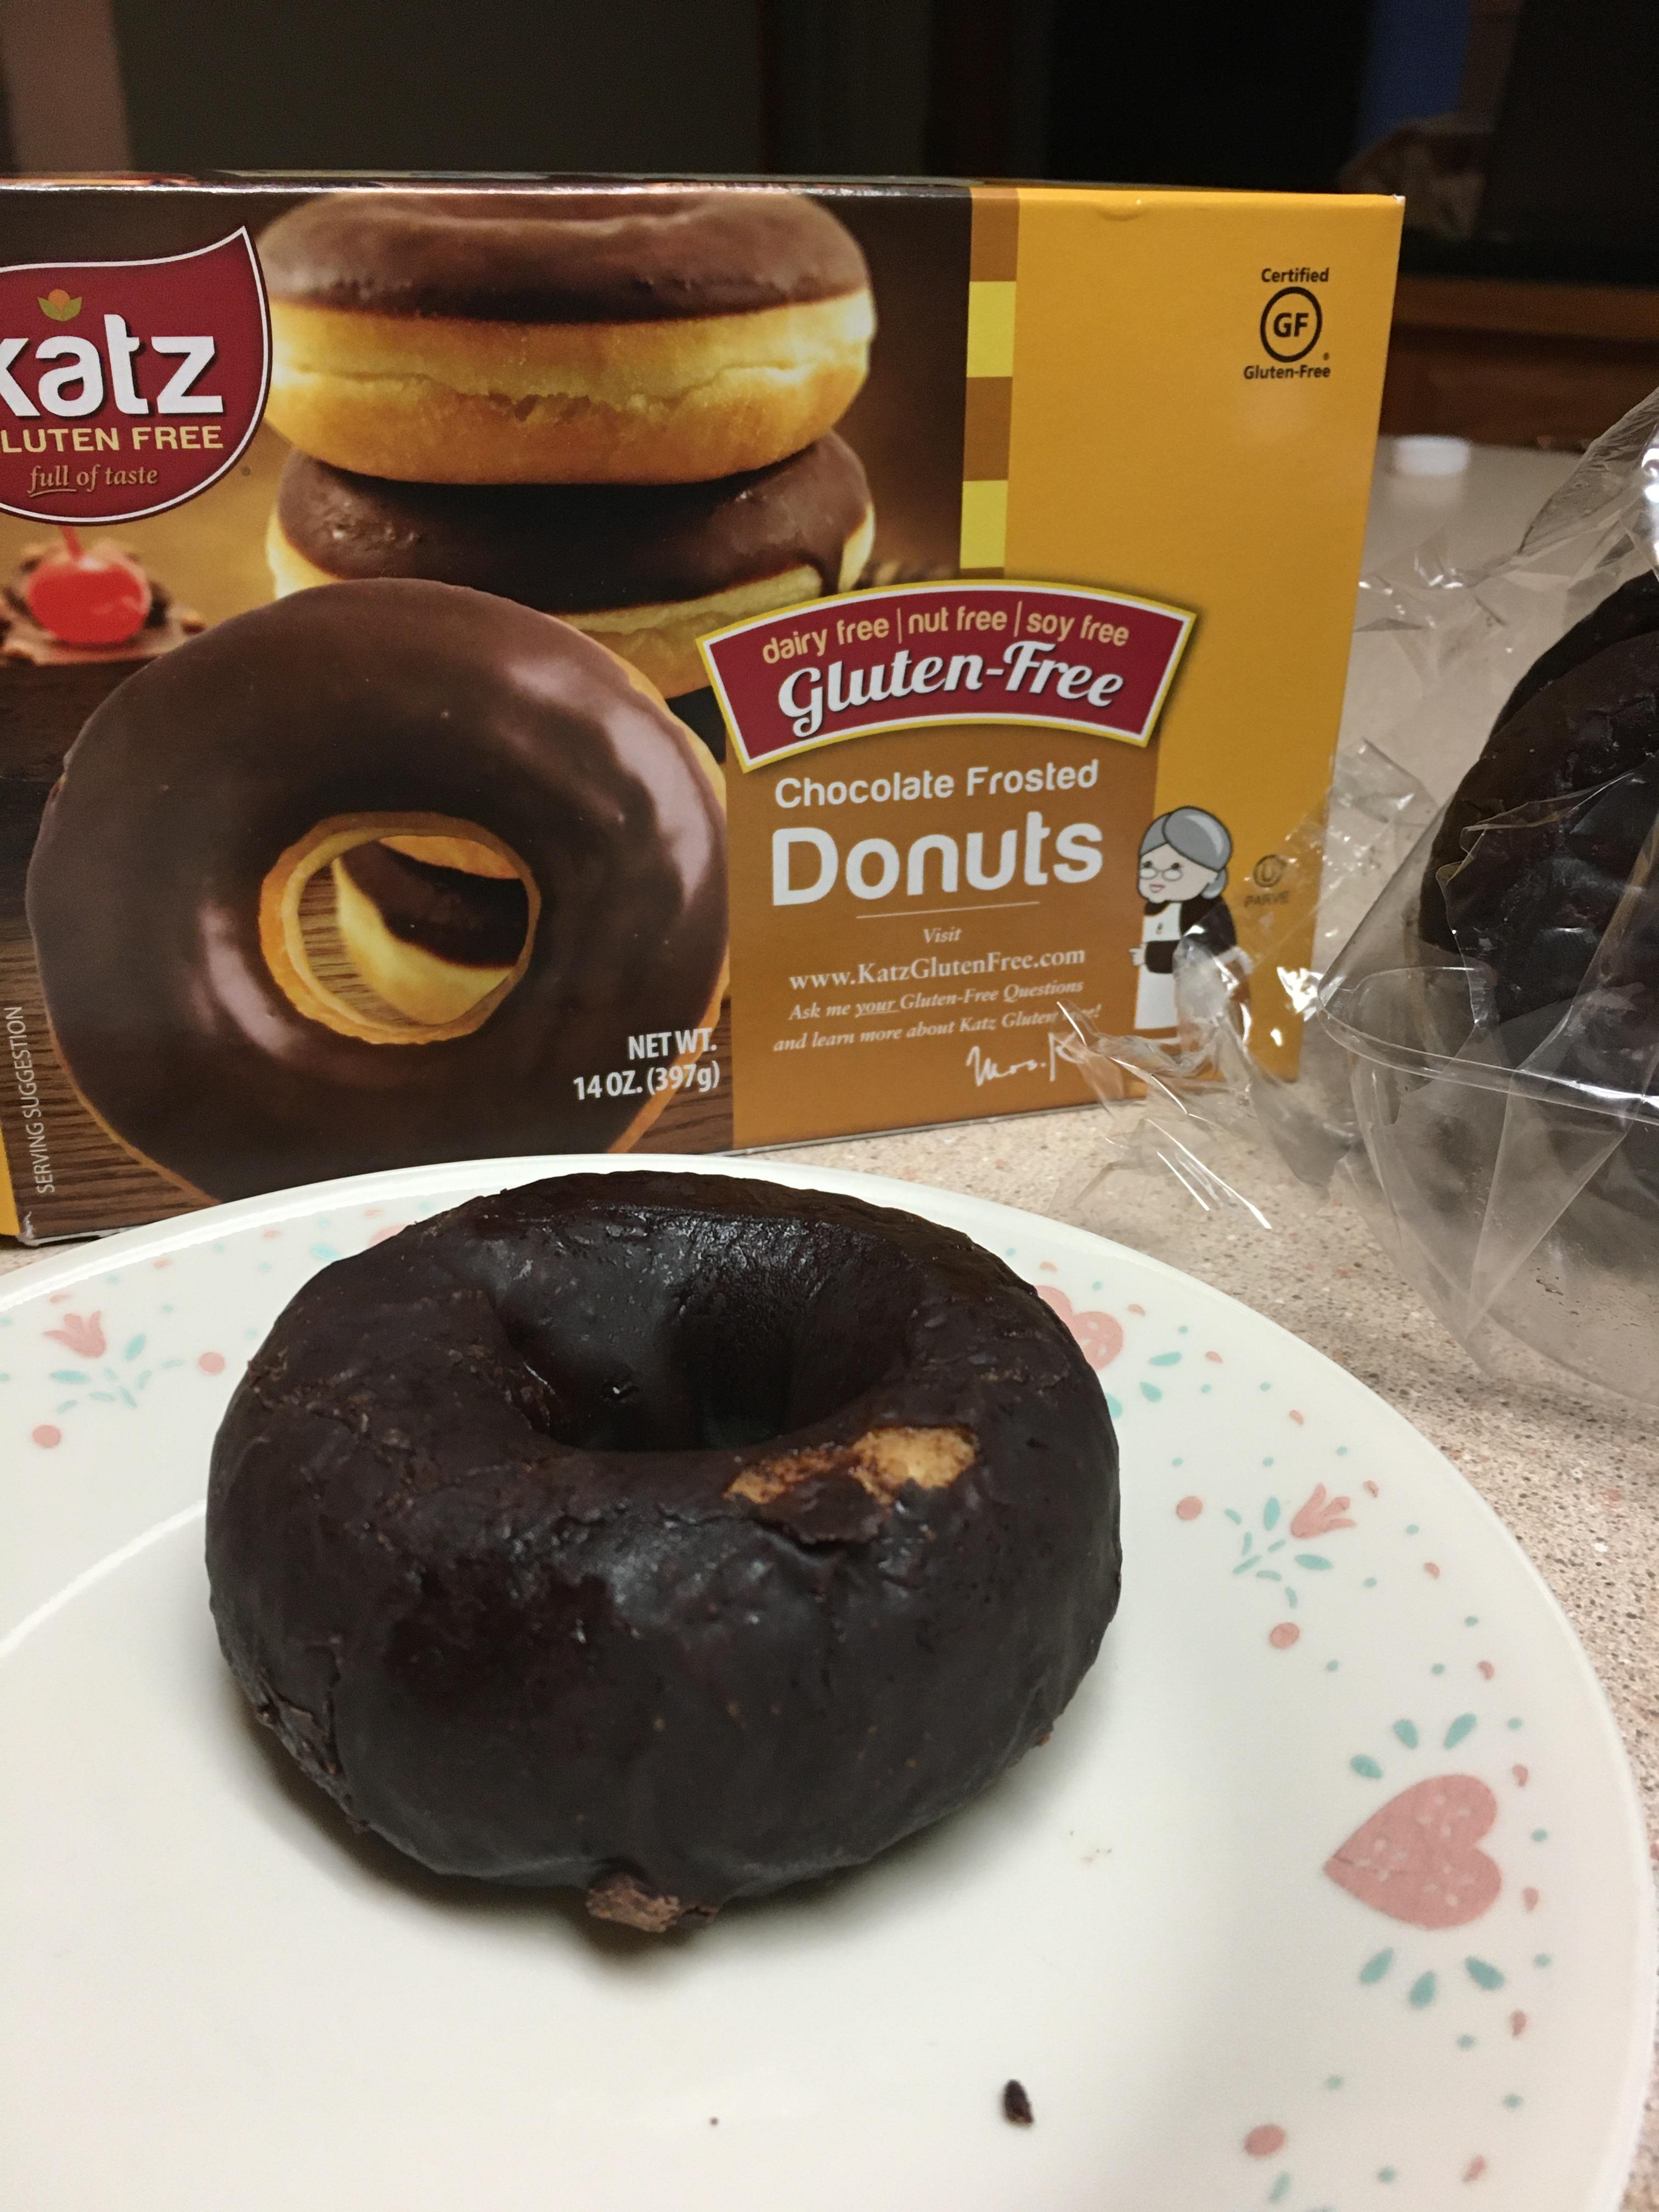 snack cake - katz Luten Free y ree GlutenFree Chocolate Frosted Donuts Netw 10.